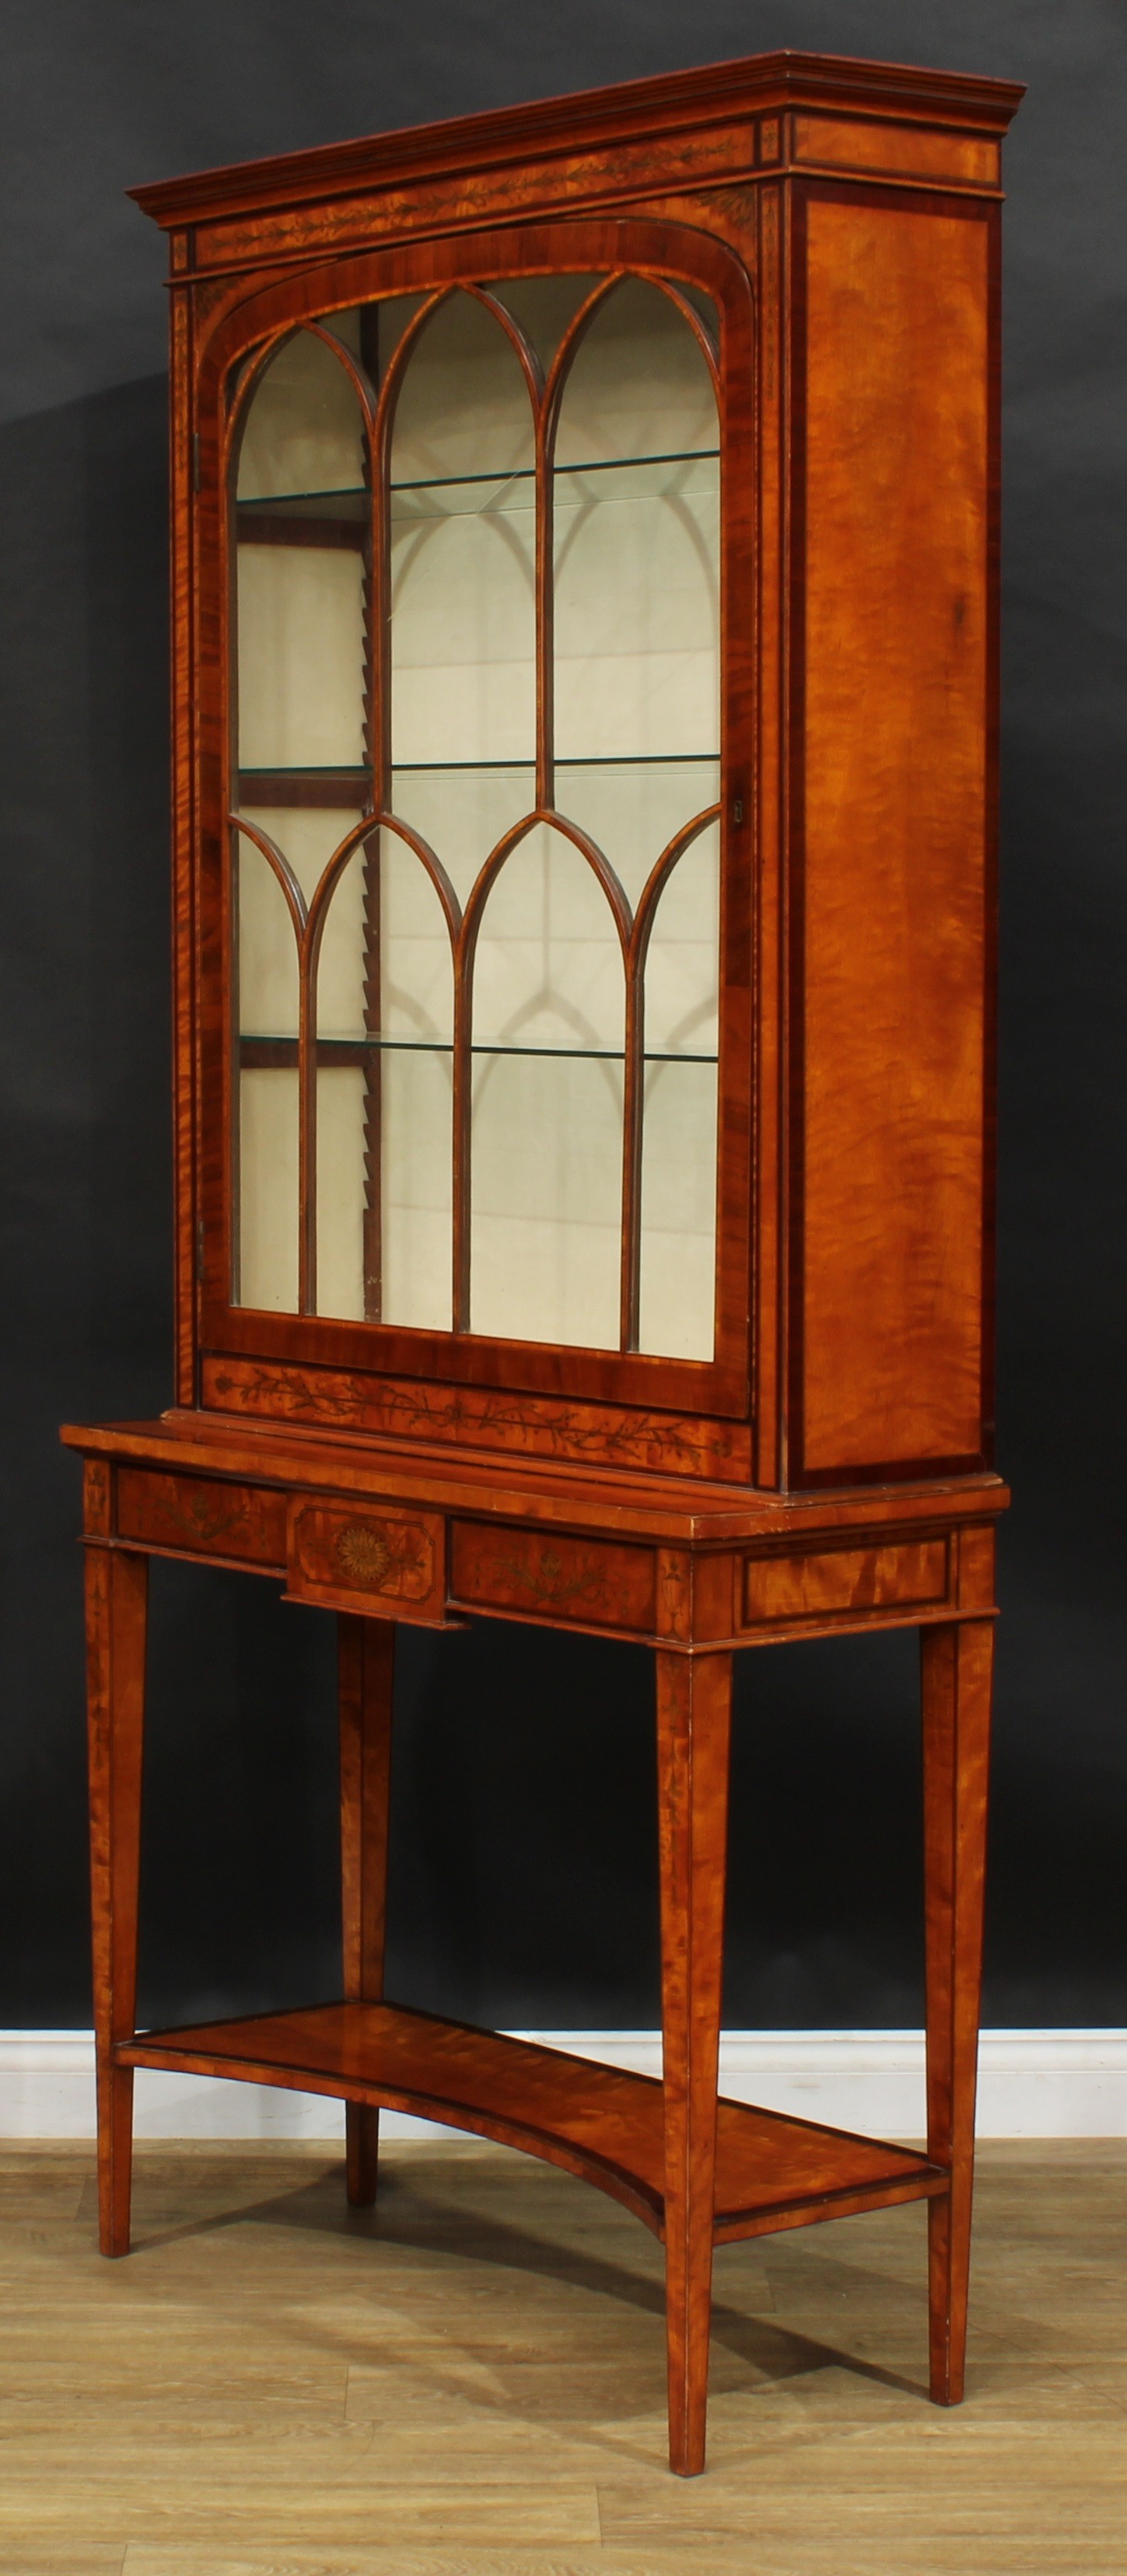 A Sheraton Revival mahogany crossbanded satinwood and marquetry display cabinet on stand, moulded - Image 4 of 5